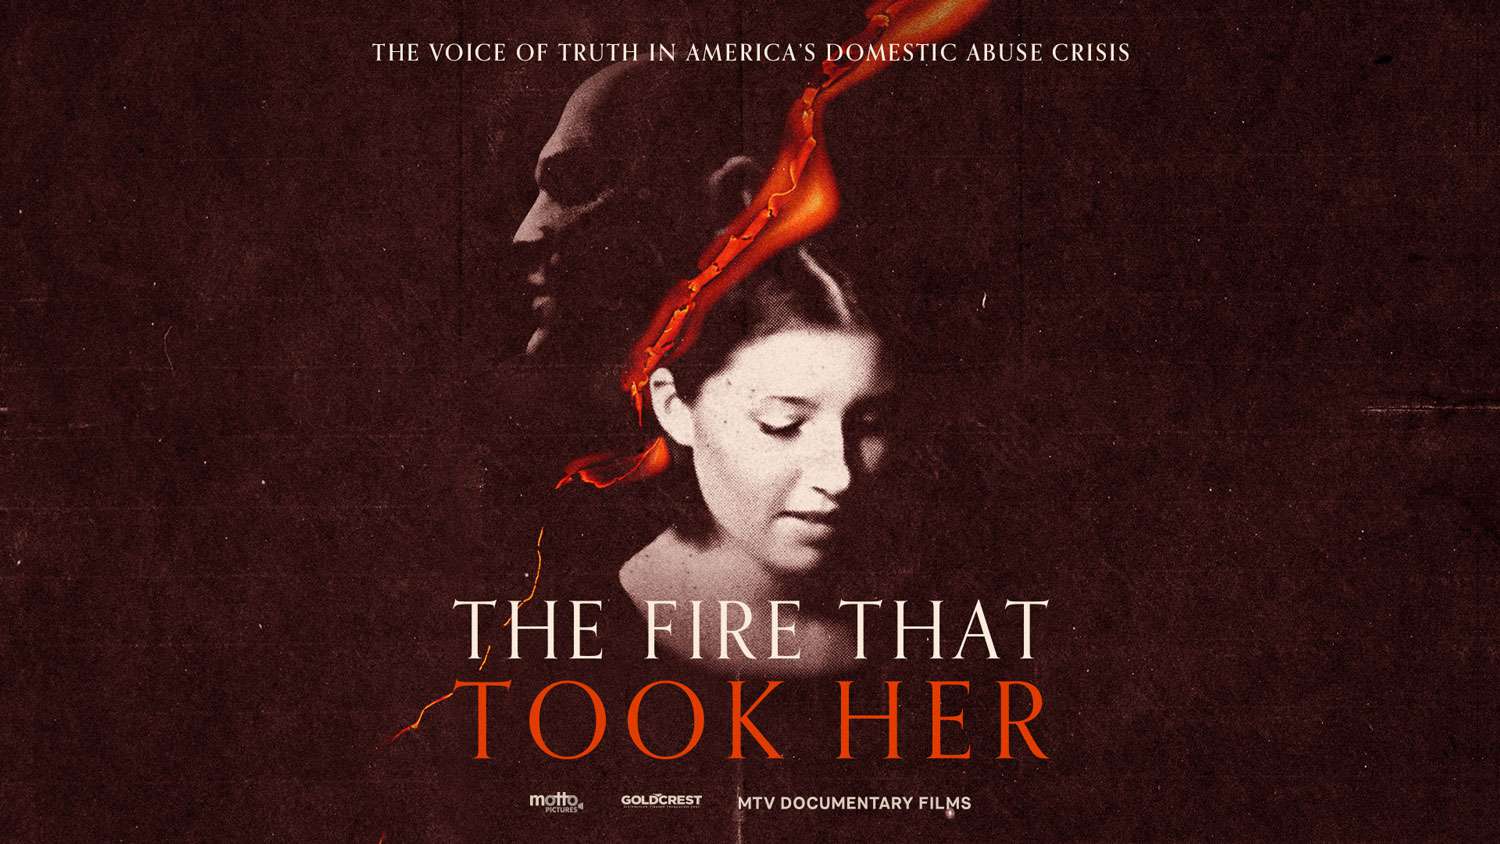 The Fire That Took Her 2022, Watch The Fire That Took Her 2022 online free, Watch The Fire That Took Her 2022 full free online, Watch movie The Fire That Took Her 2022 free online, Watch full movie The Fire That Took Her 2022 free online, Documentary Movies